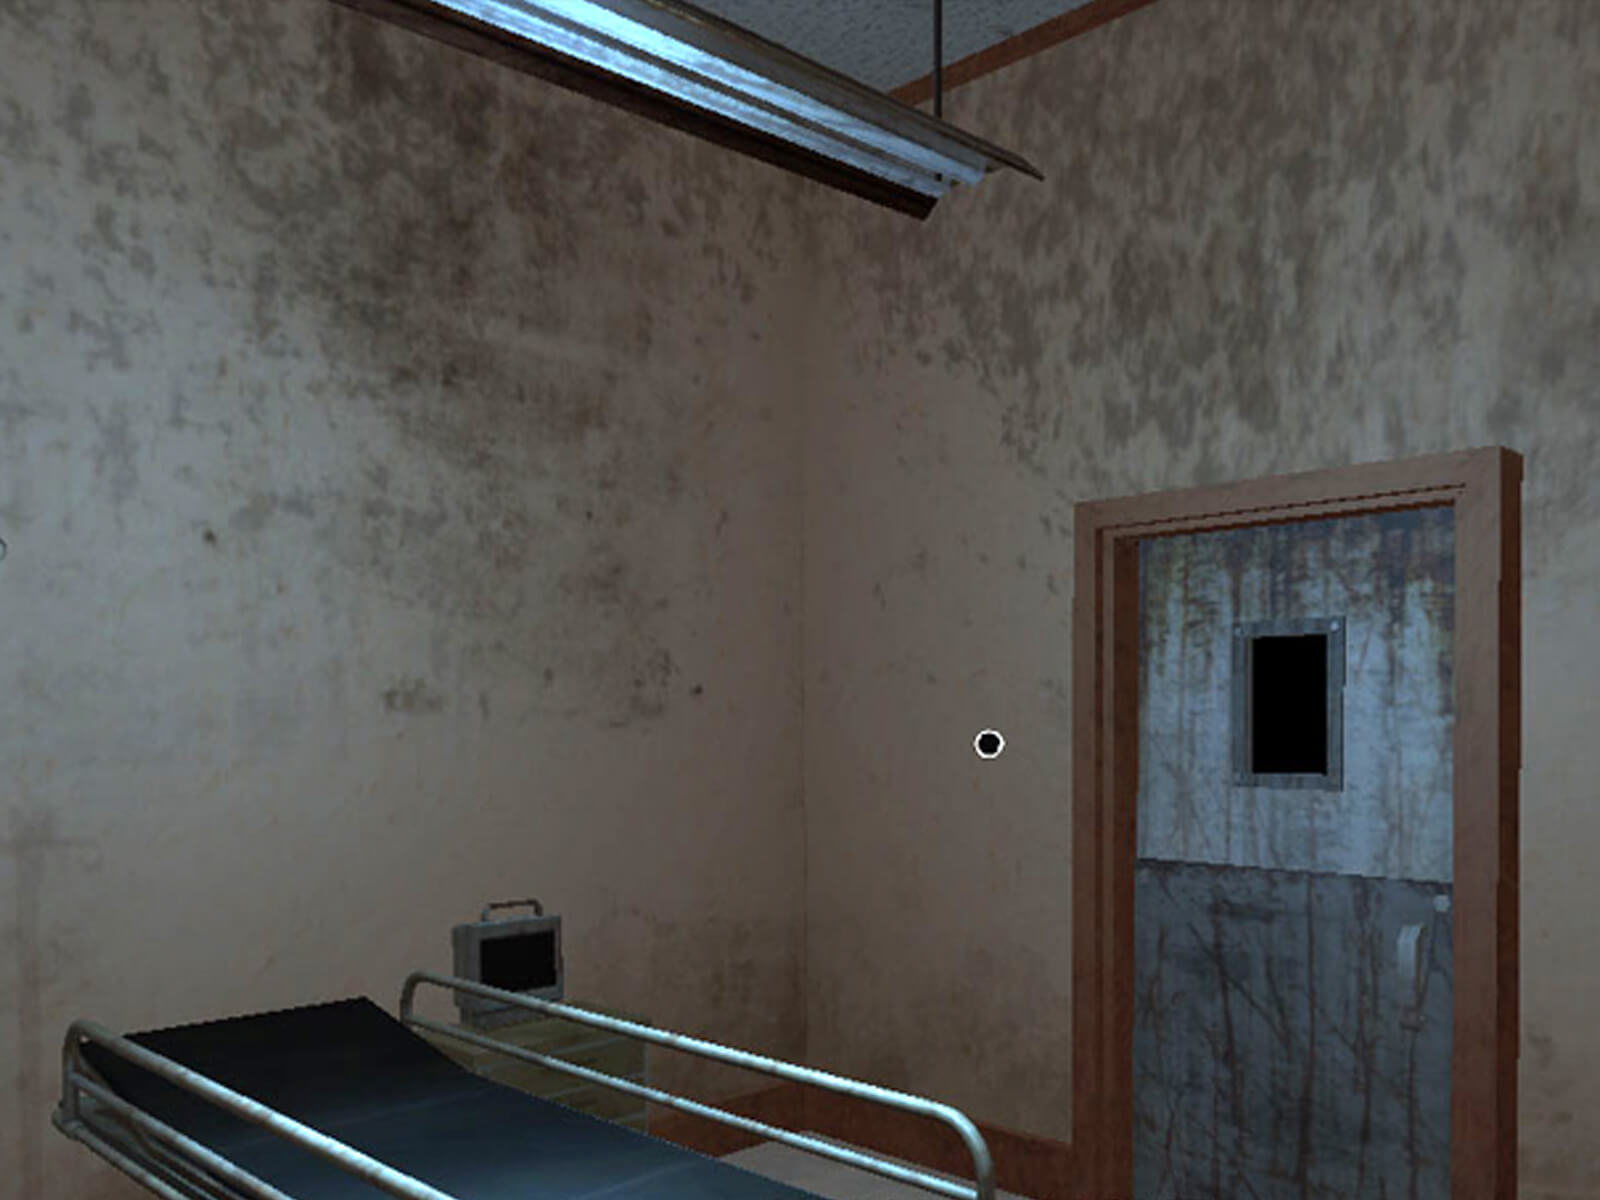 Screenshot of game inside a grimy hospital room with a gurney and door